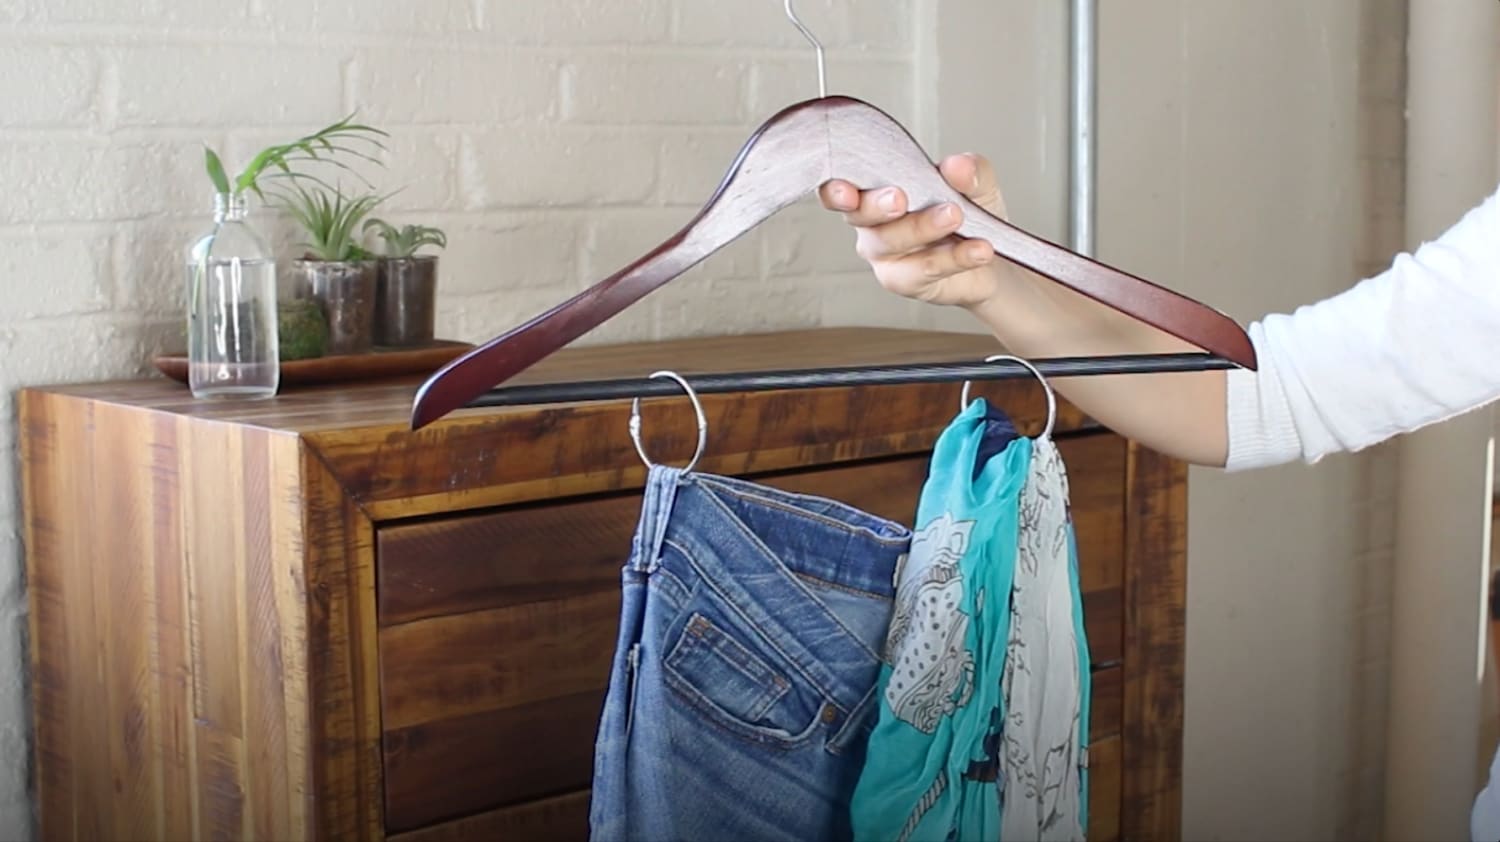 How To Choose A Clothes Hanger  Choosing The Right Hangers For Men's  Clothing